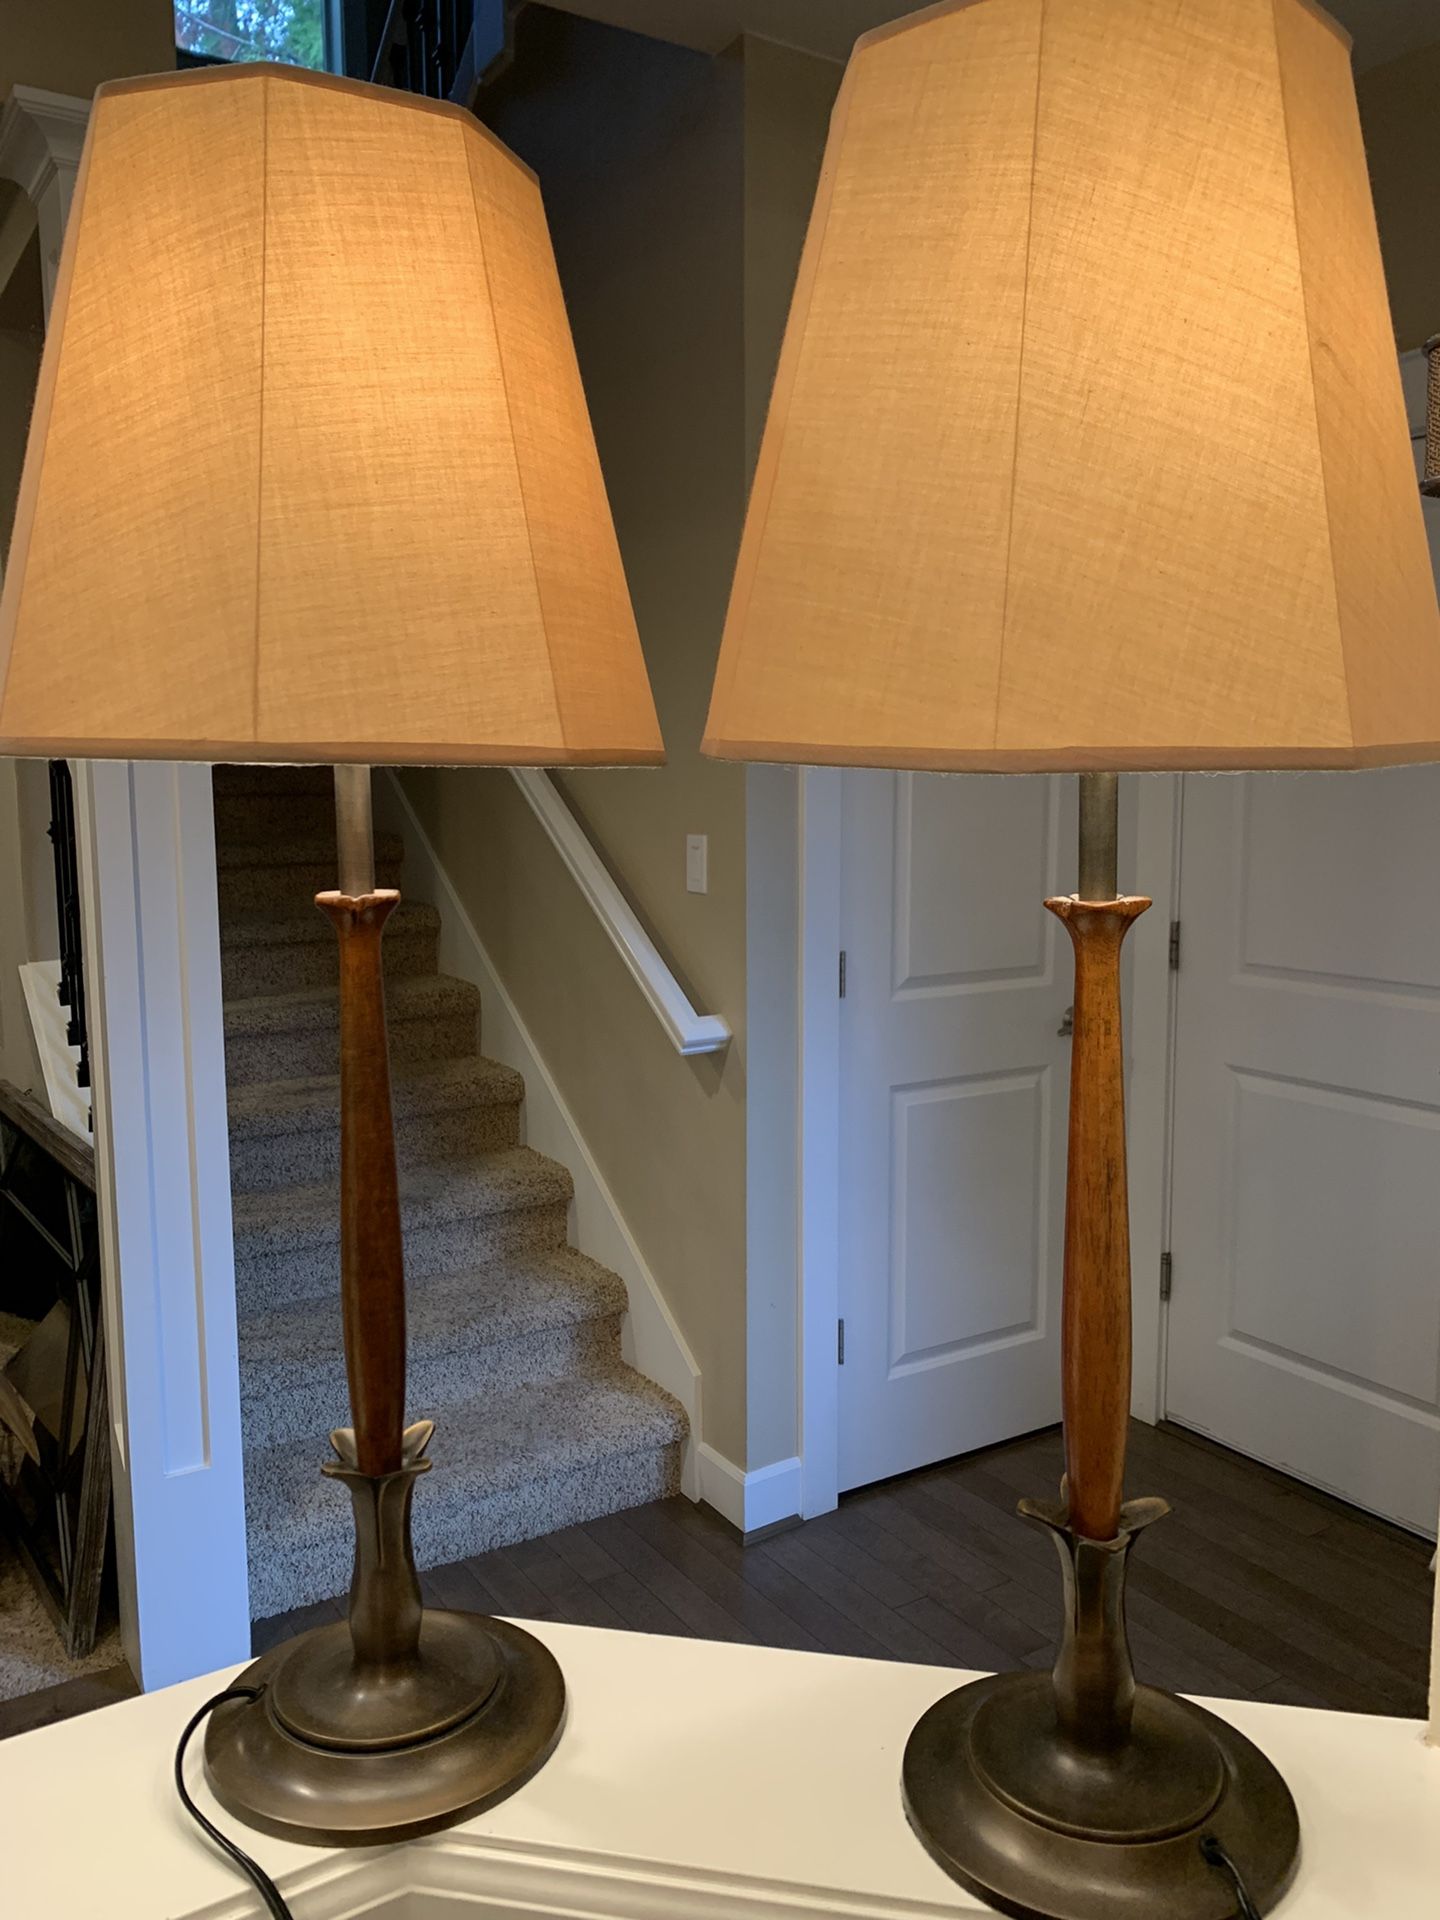 2 Matching Lamps 28” Height